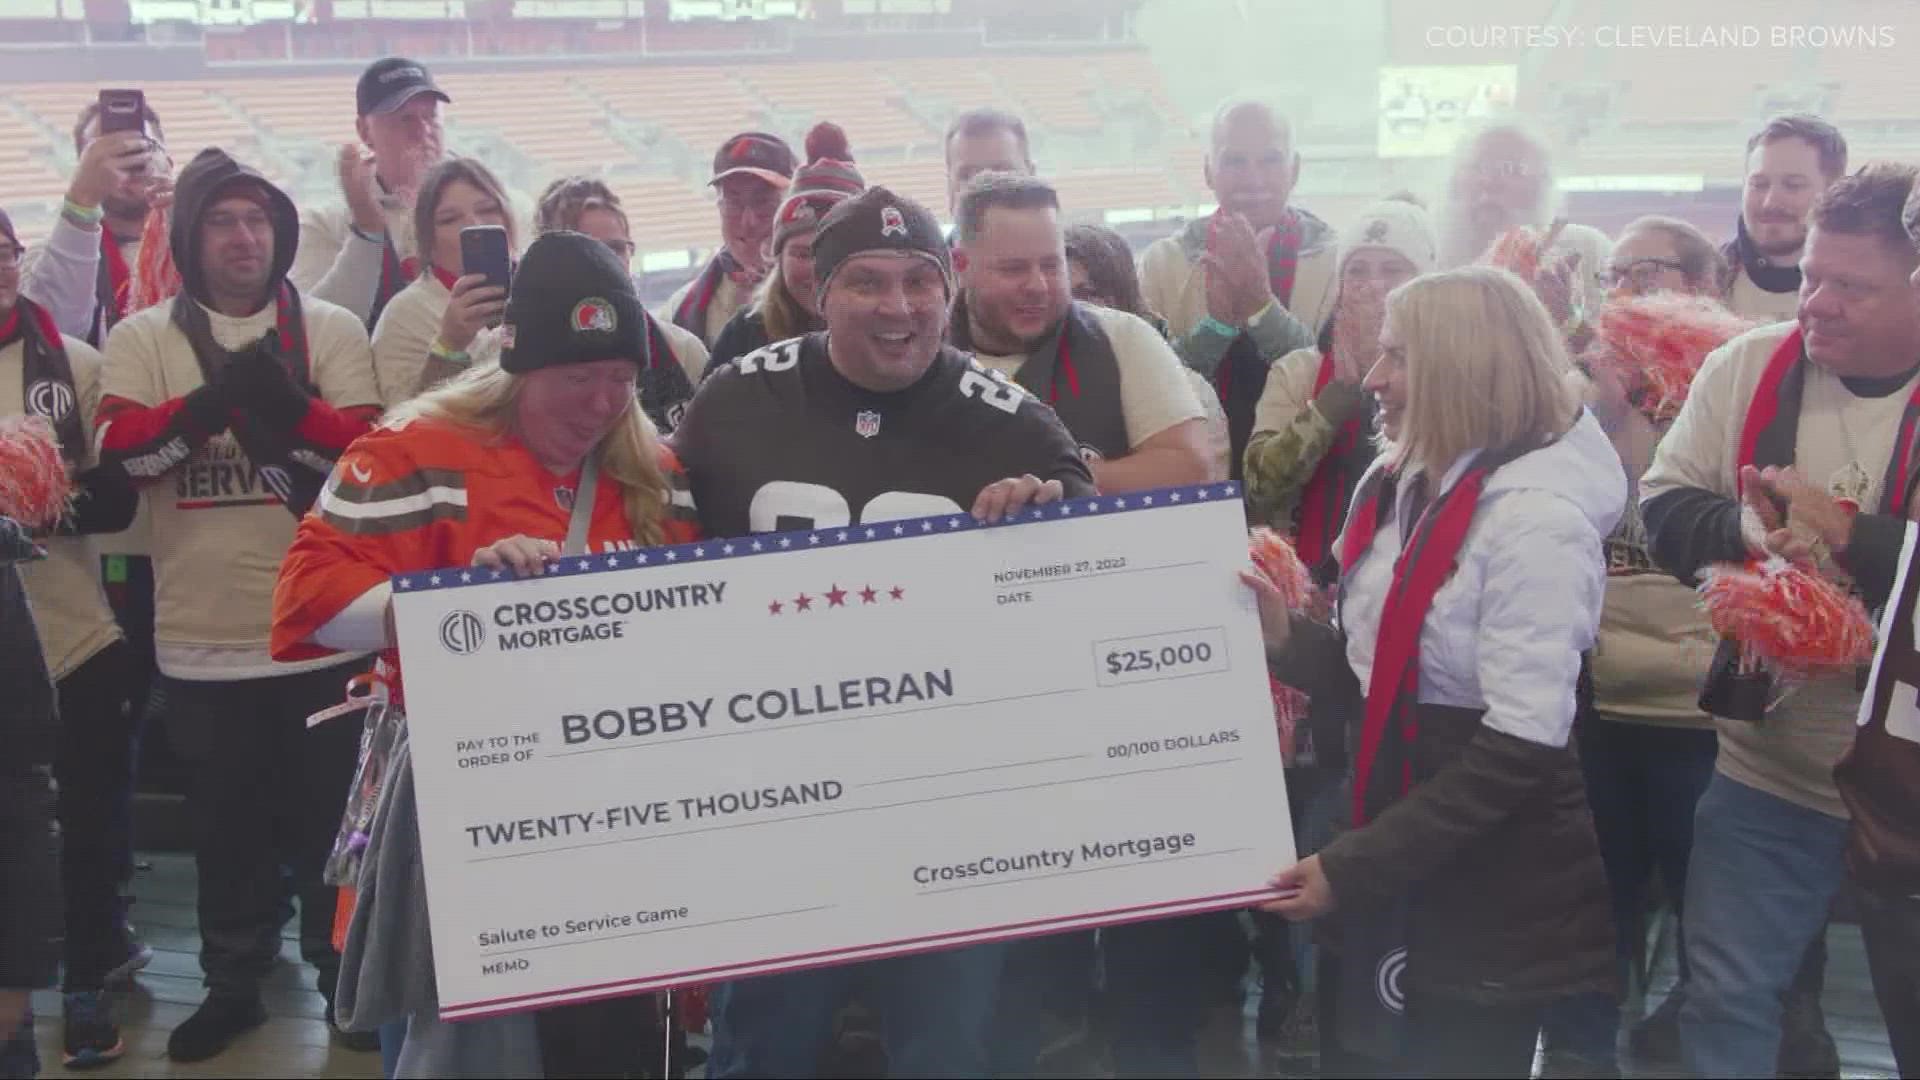 Veteran Bobby Colleran from North Ridgeville was surprised with $25,000 to help with housing costs.